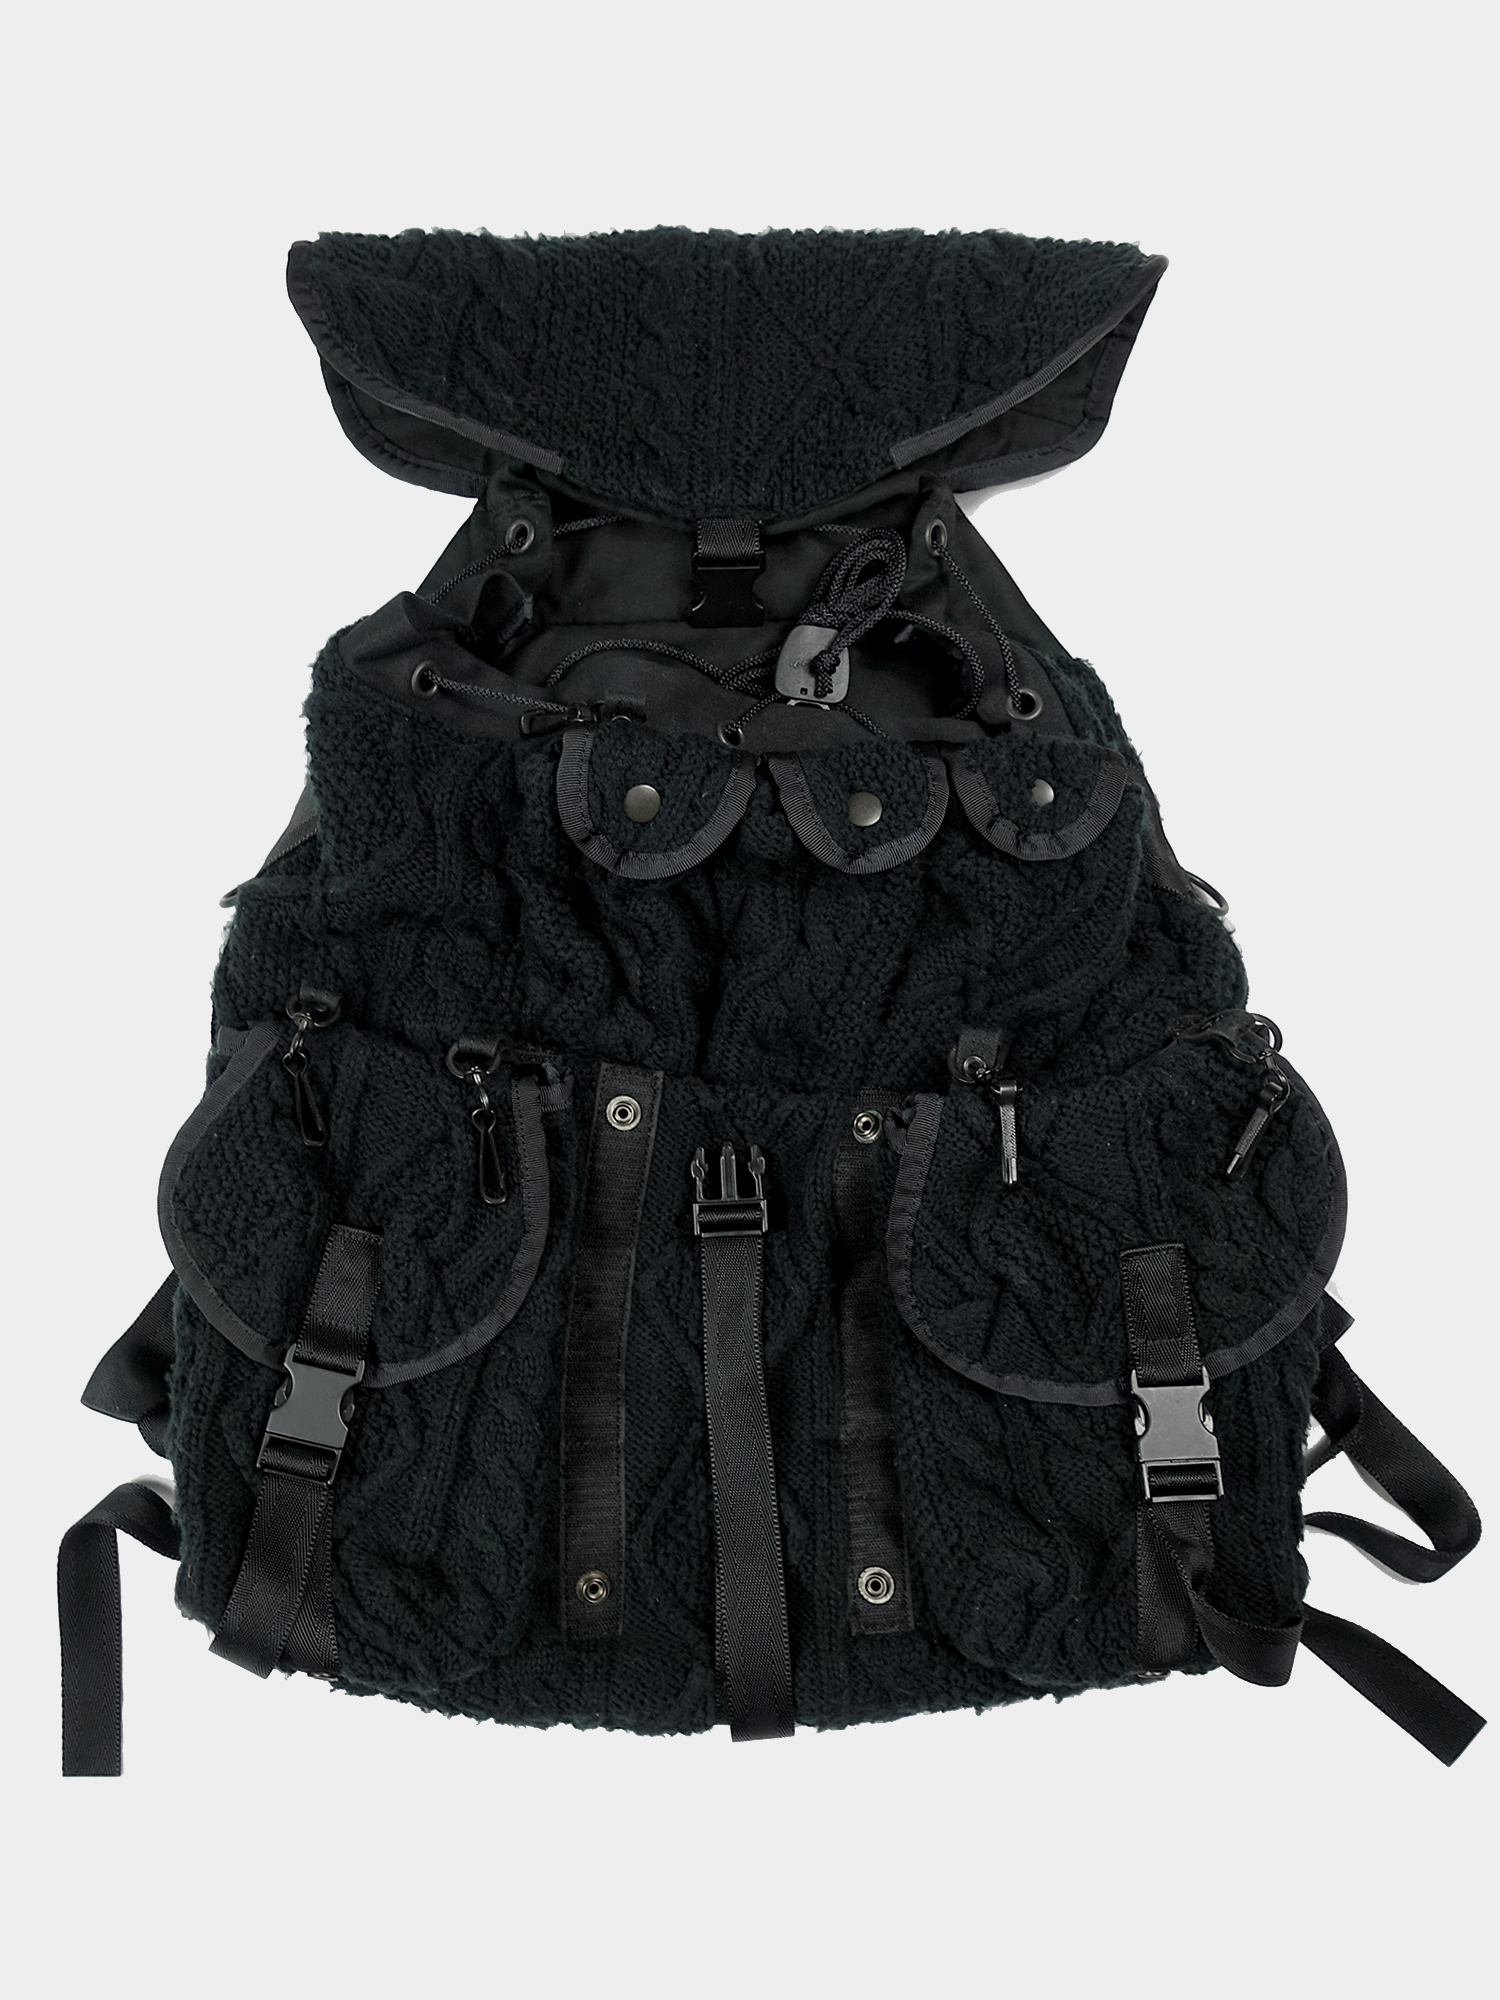 UNDERCOVER 13AW BONE PATCH BACKPACK - 通販 - gofukuyasan.com